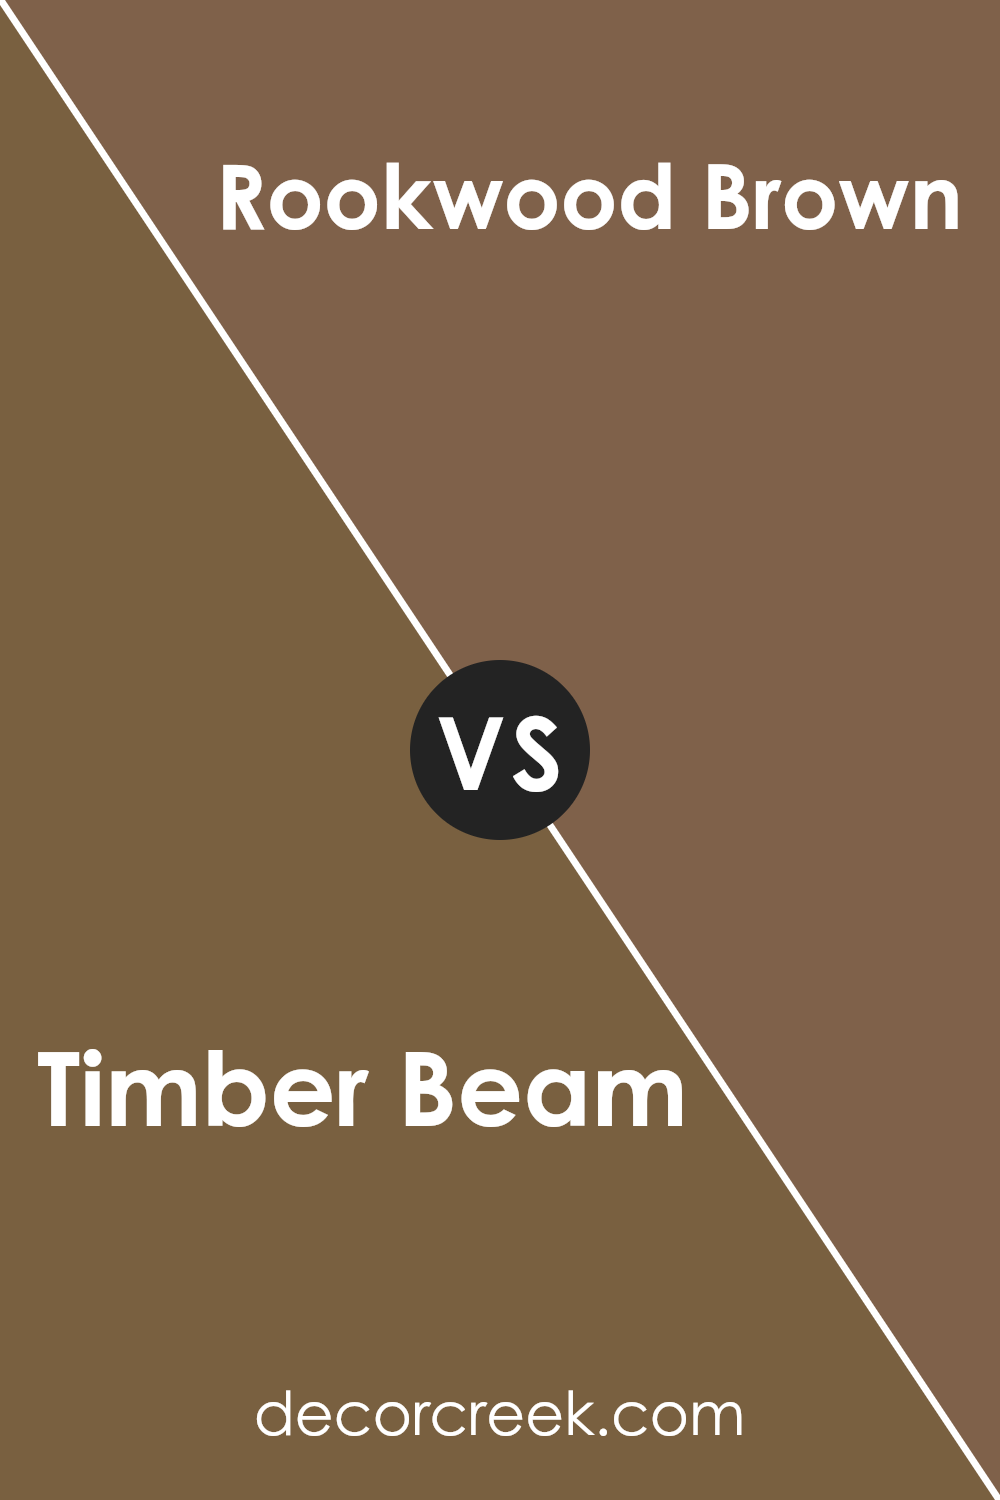 timber_beam_sw_9540_vs_rookwood_brown_sw_2806